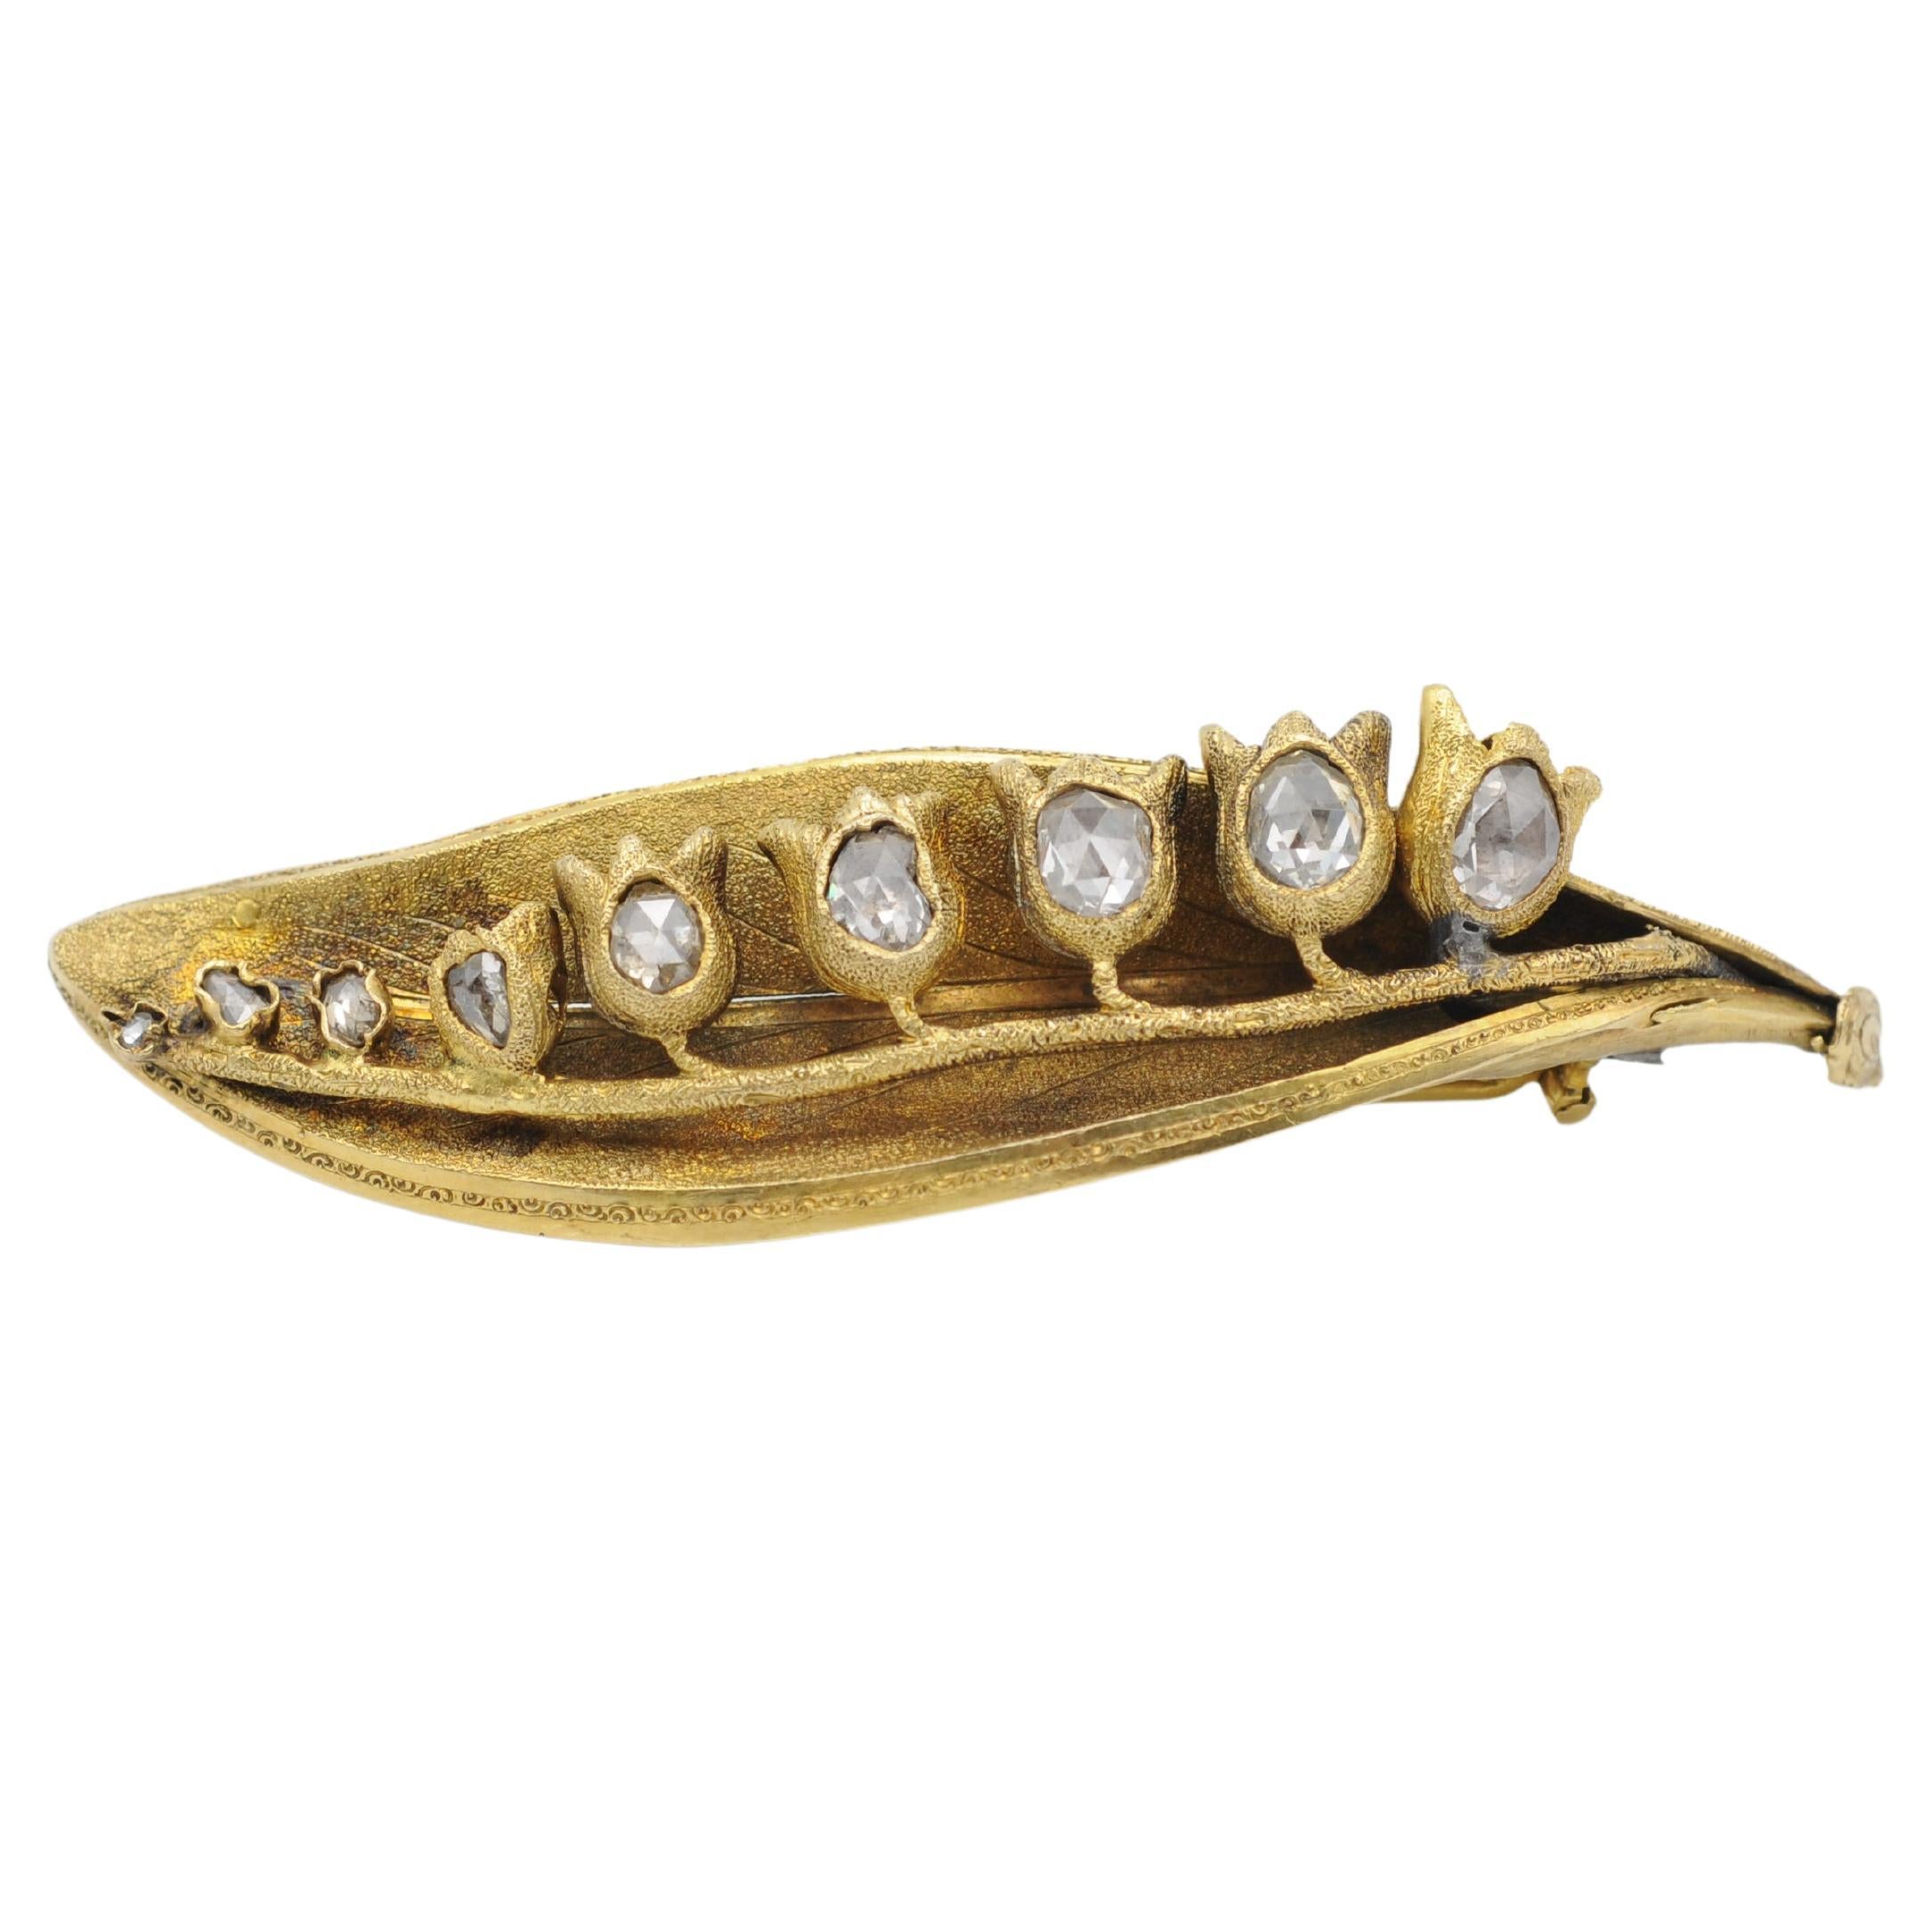  Art Nouveau Brooch  with diamonds in rose cut 14K Yellow Gold  For Sale 8